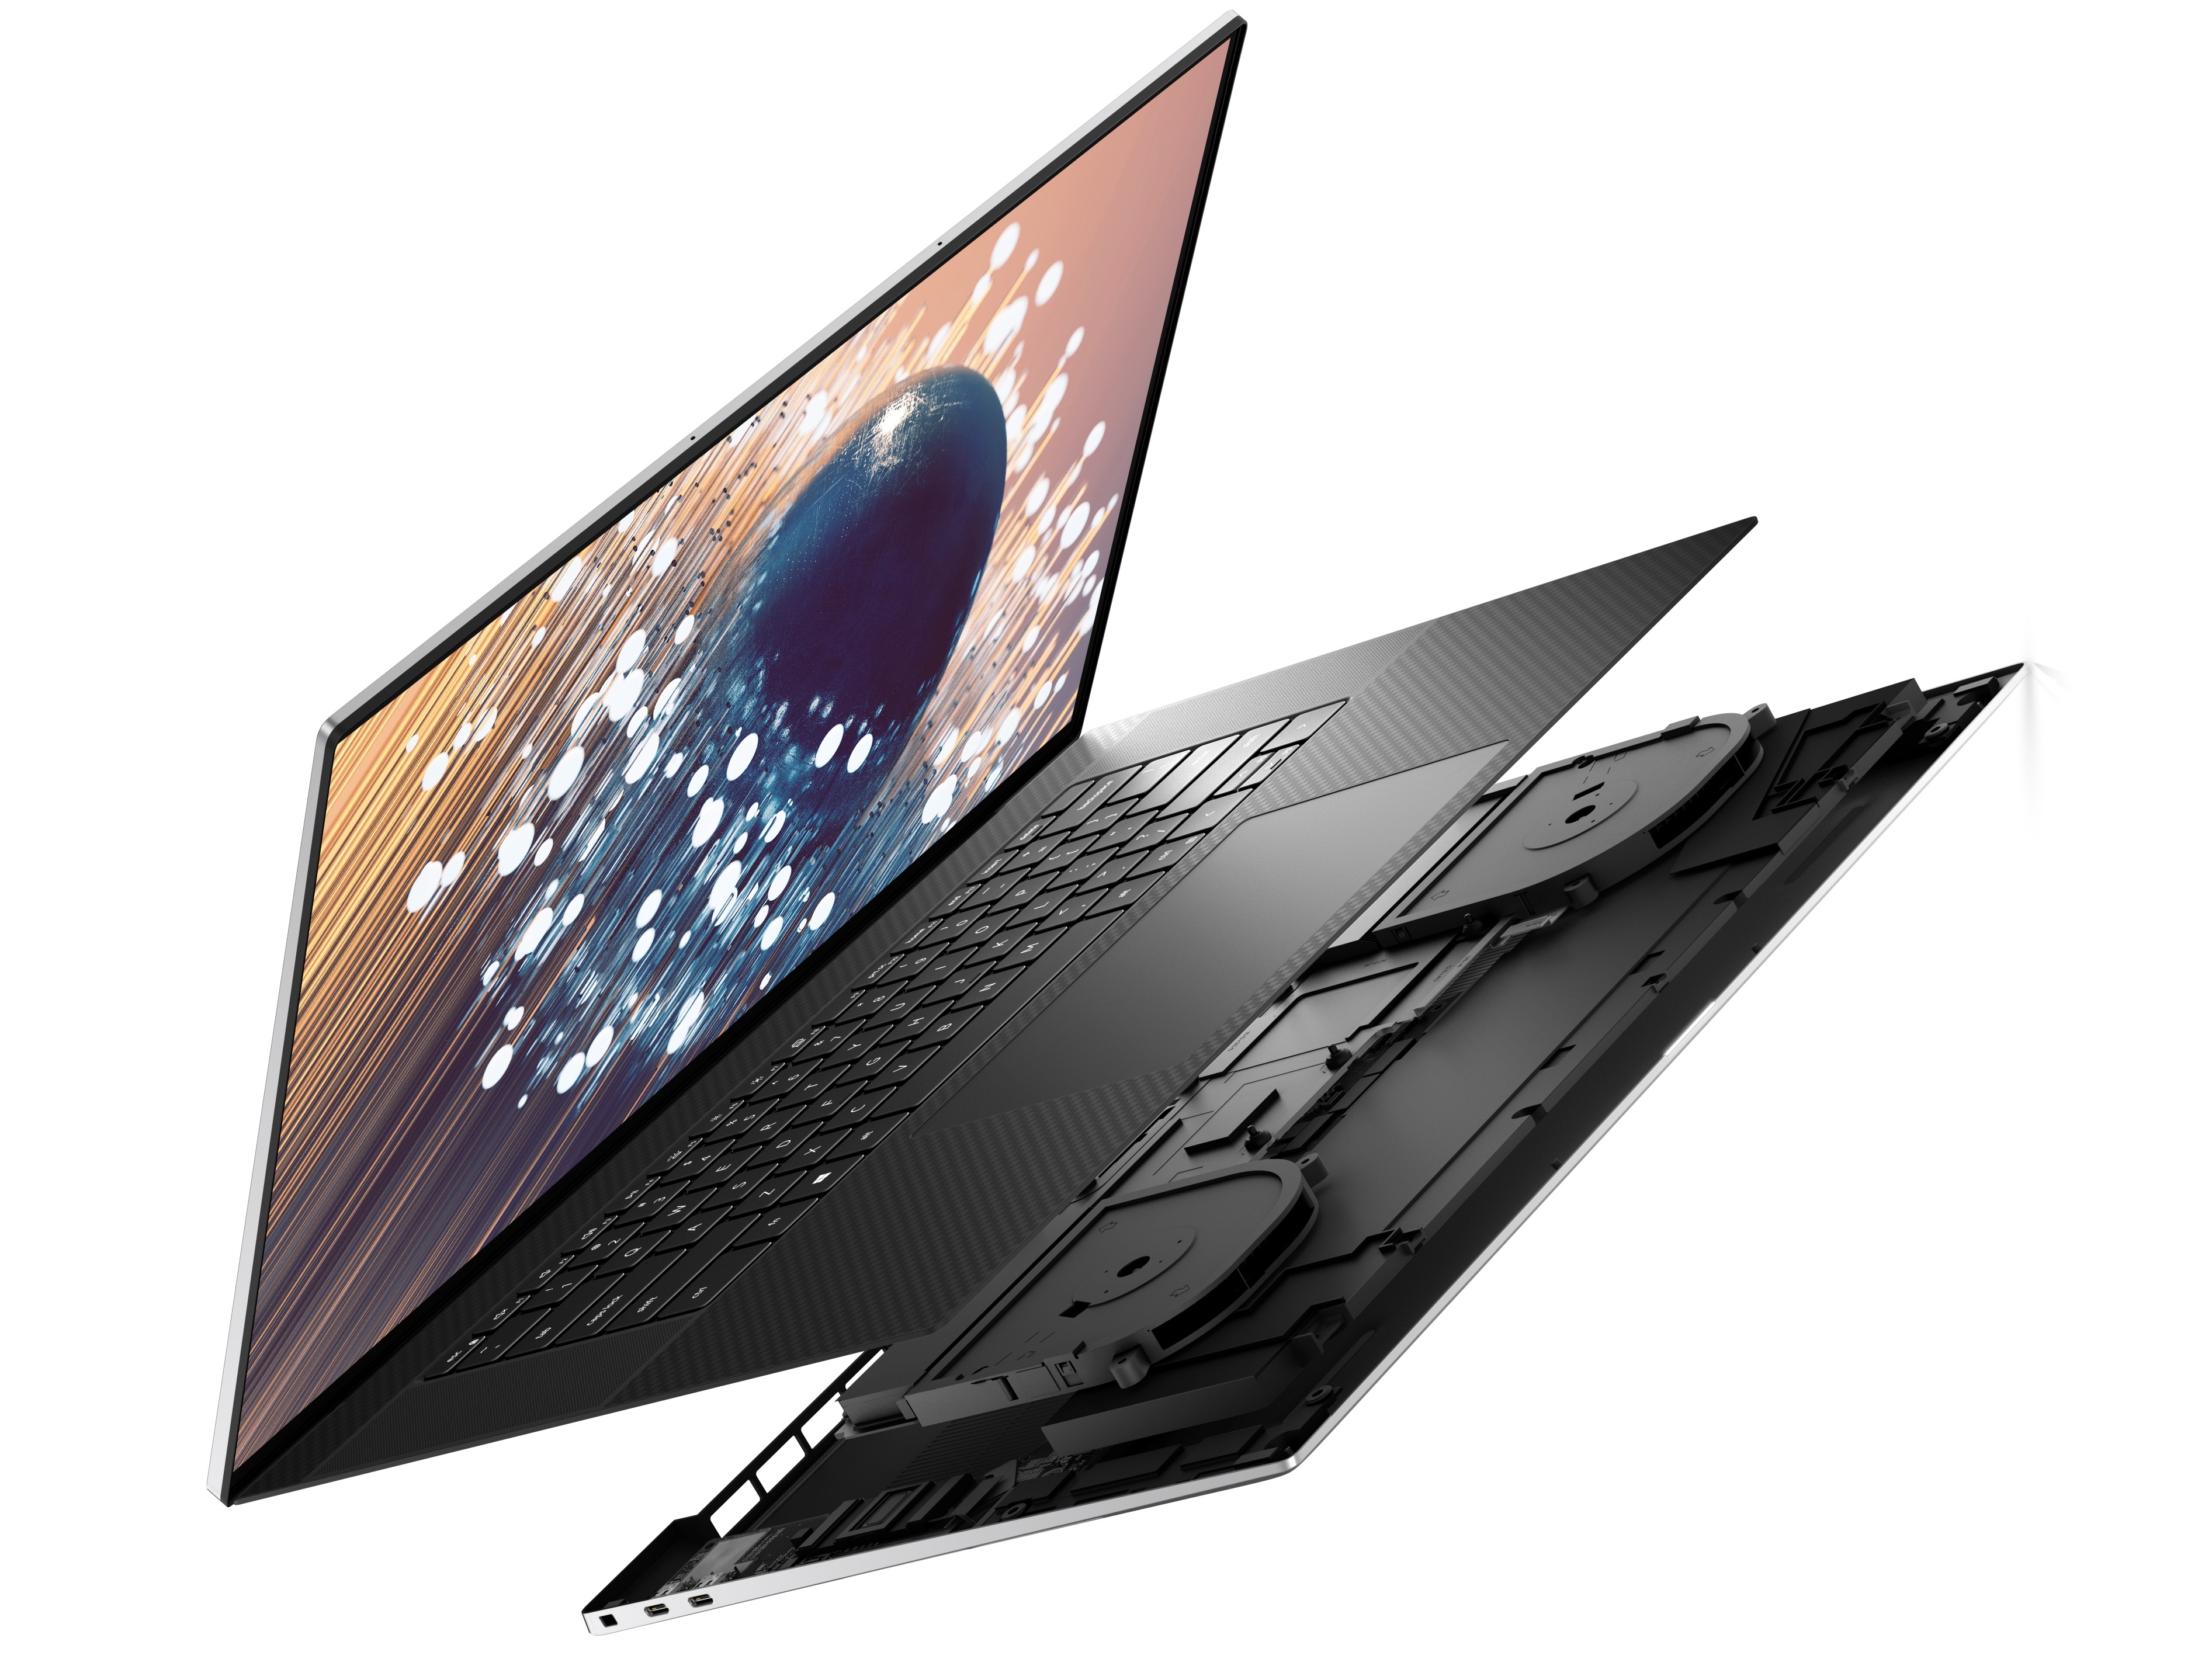 Dell XPS 17 9700 Core i7 Laptop Review: Pretty Much A MacBook Pro 17 -   Reviews